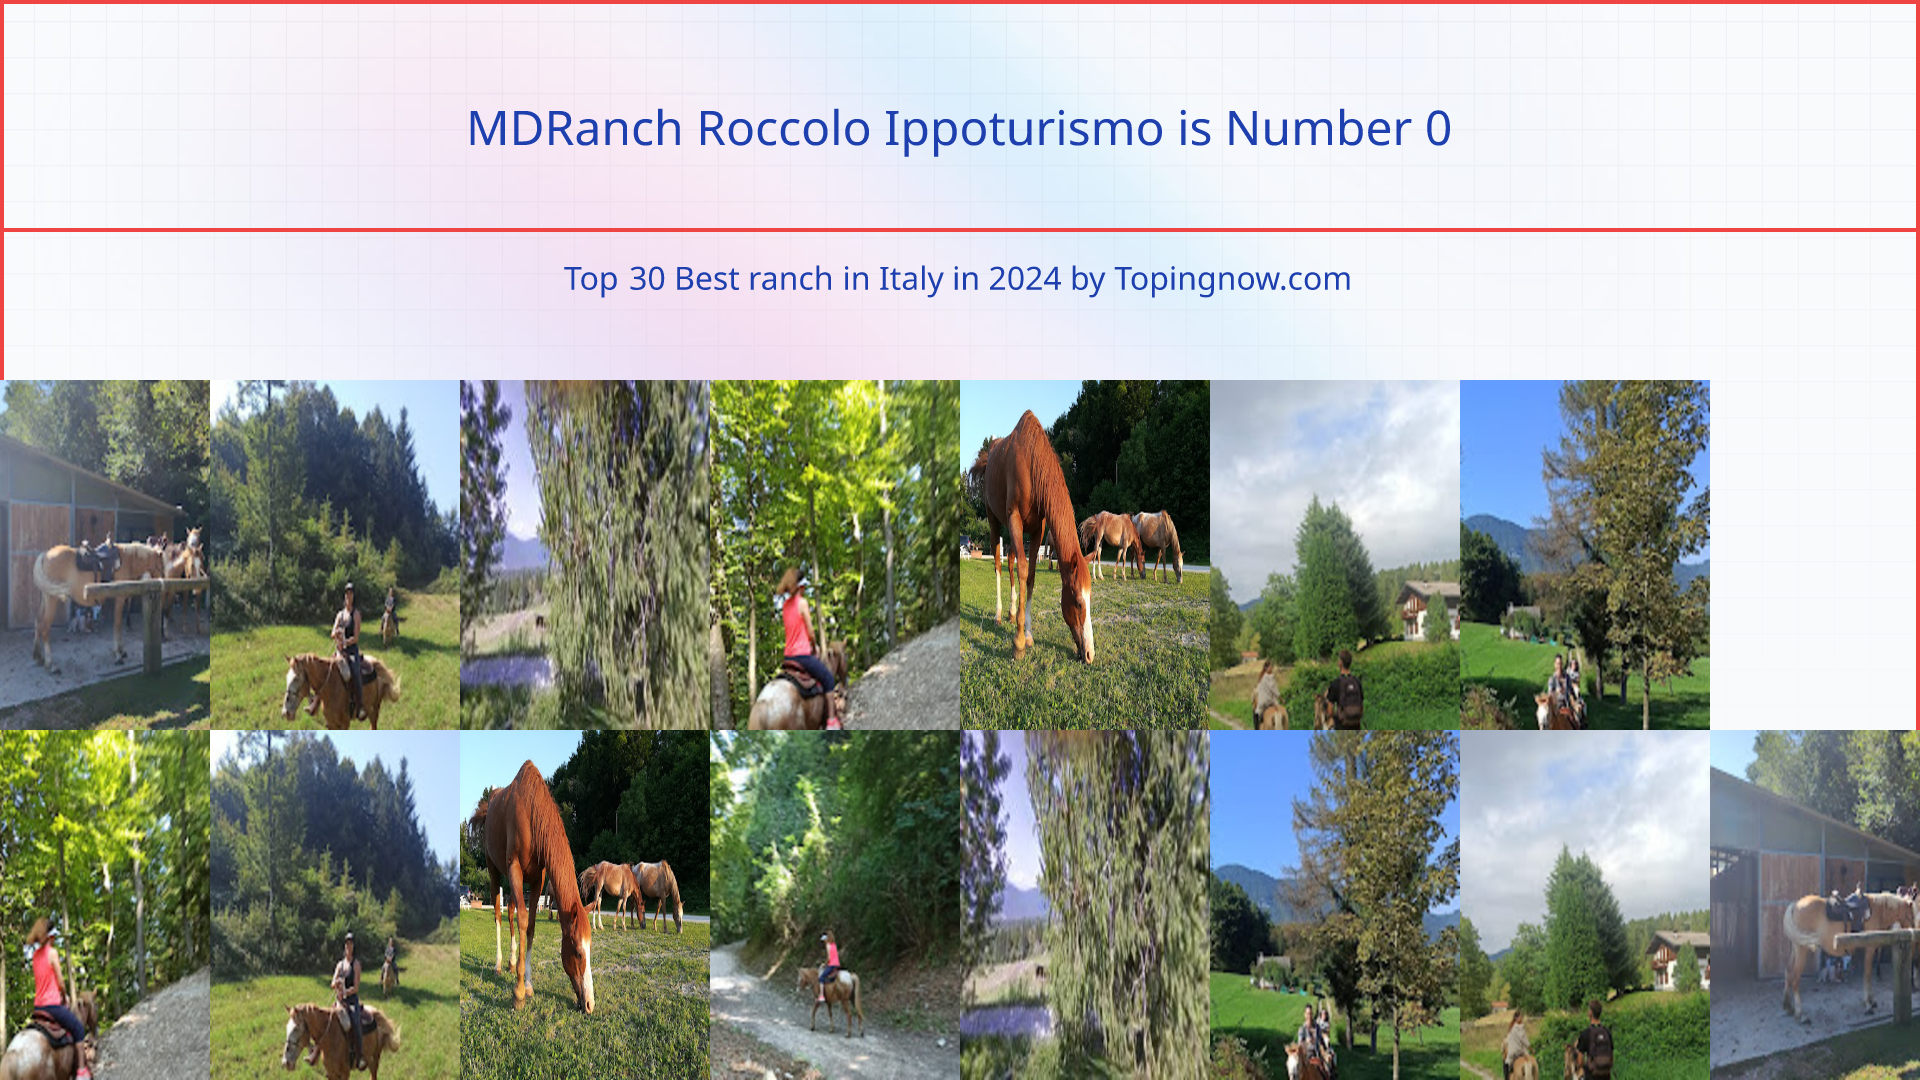 MDRanch Roccolo Ippoturismo: Top 30 Best ranch in Italy in 2024